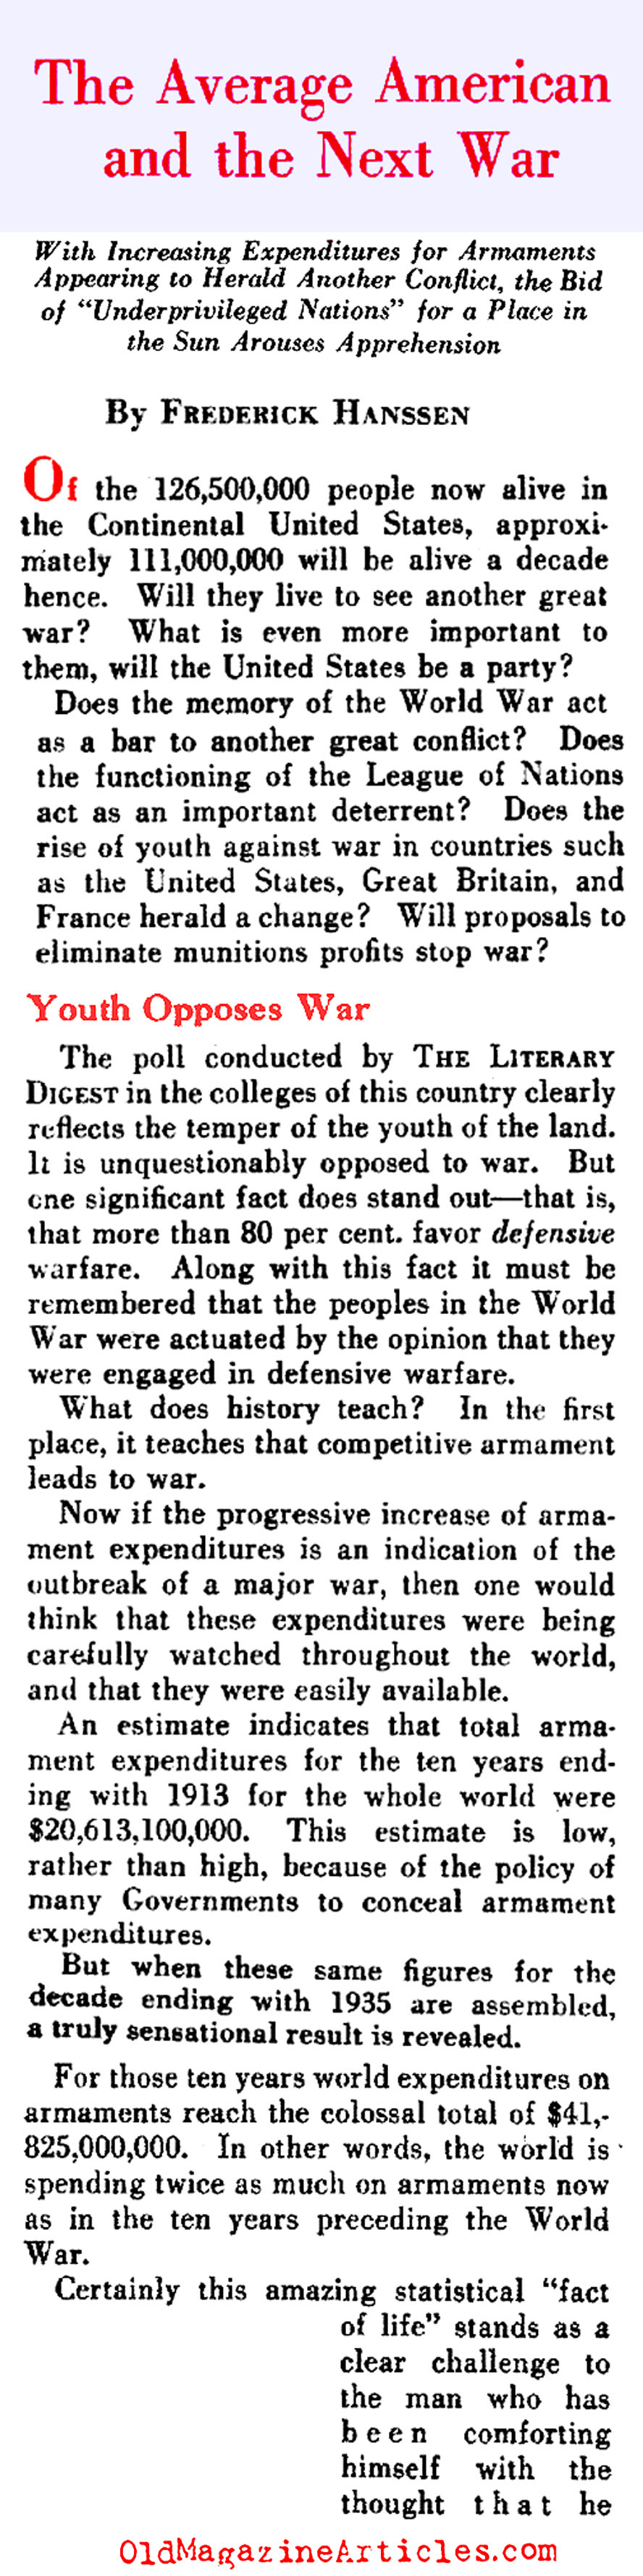 The World Wide Military Expansion (The Literary Digest, 1935)